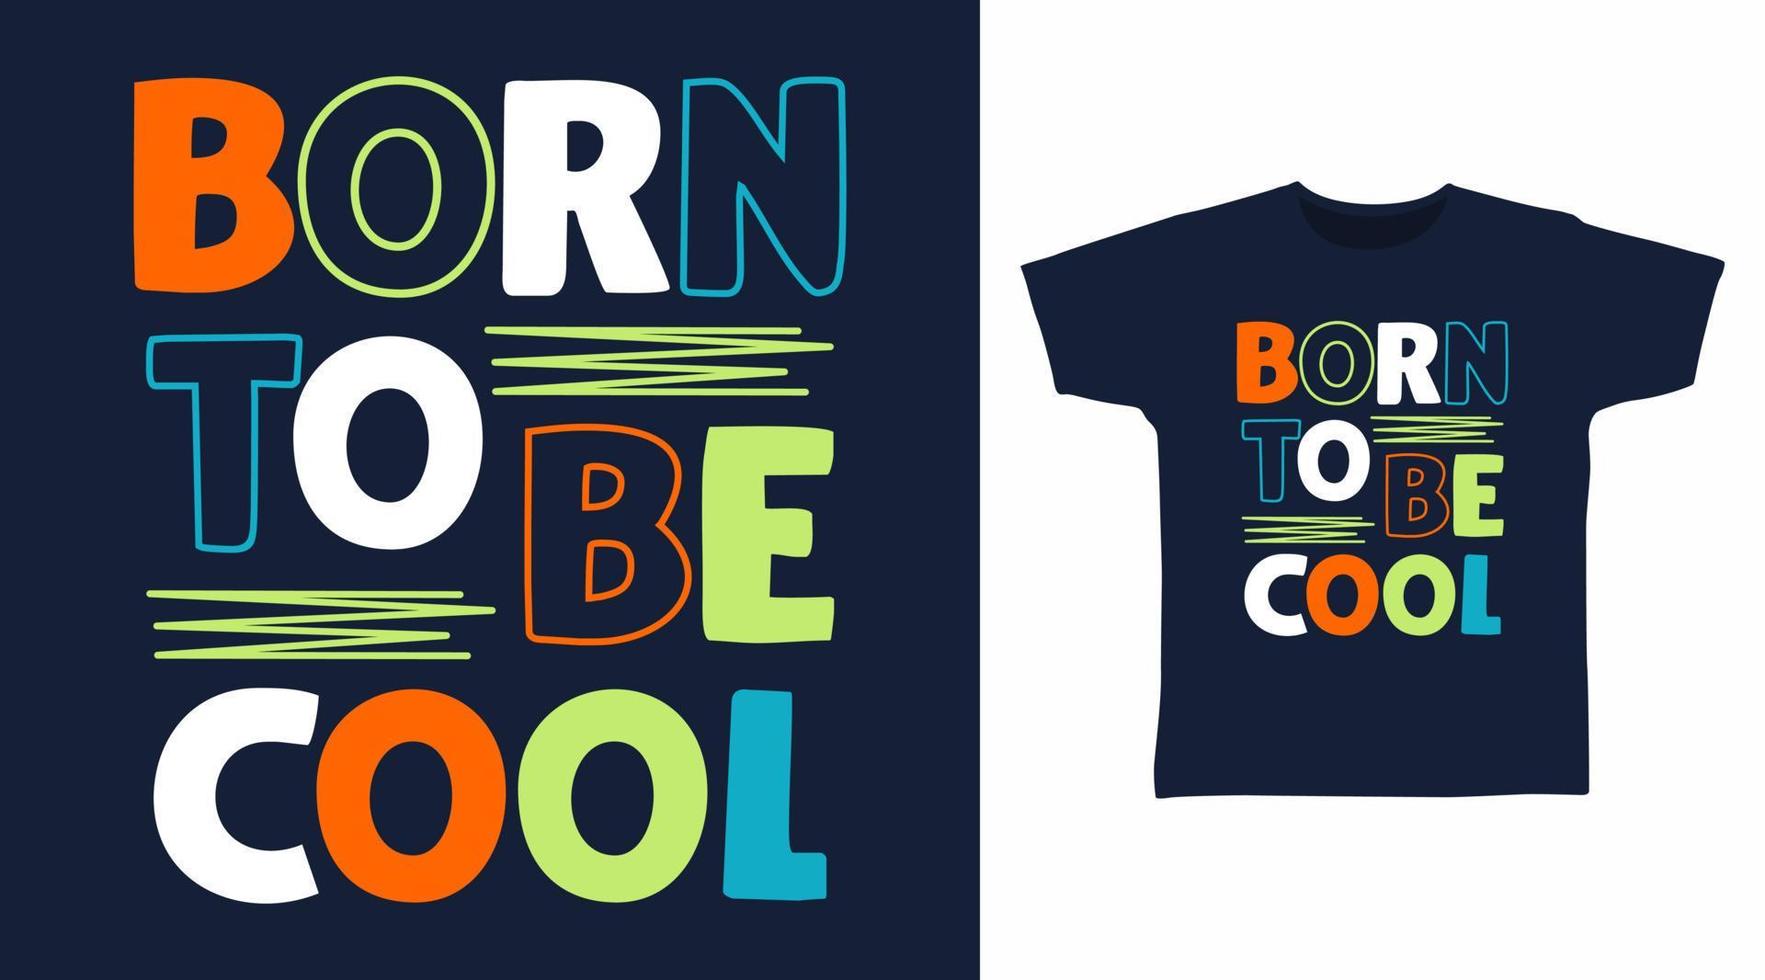 Born to be cool typography design vector illustration ready for print on tee